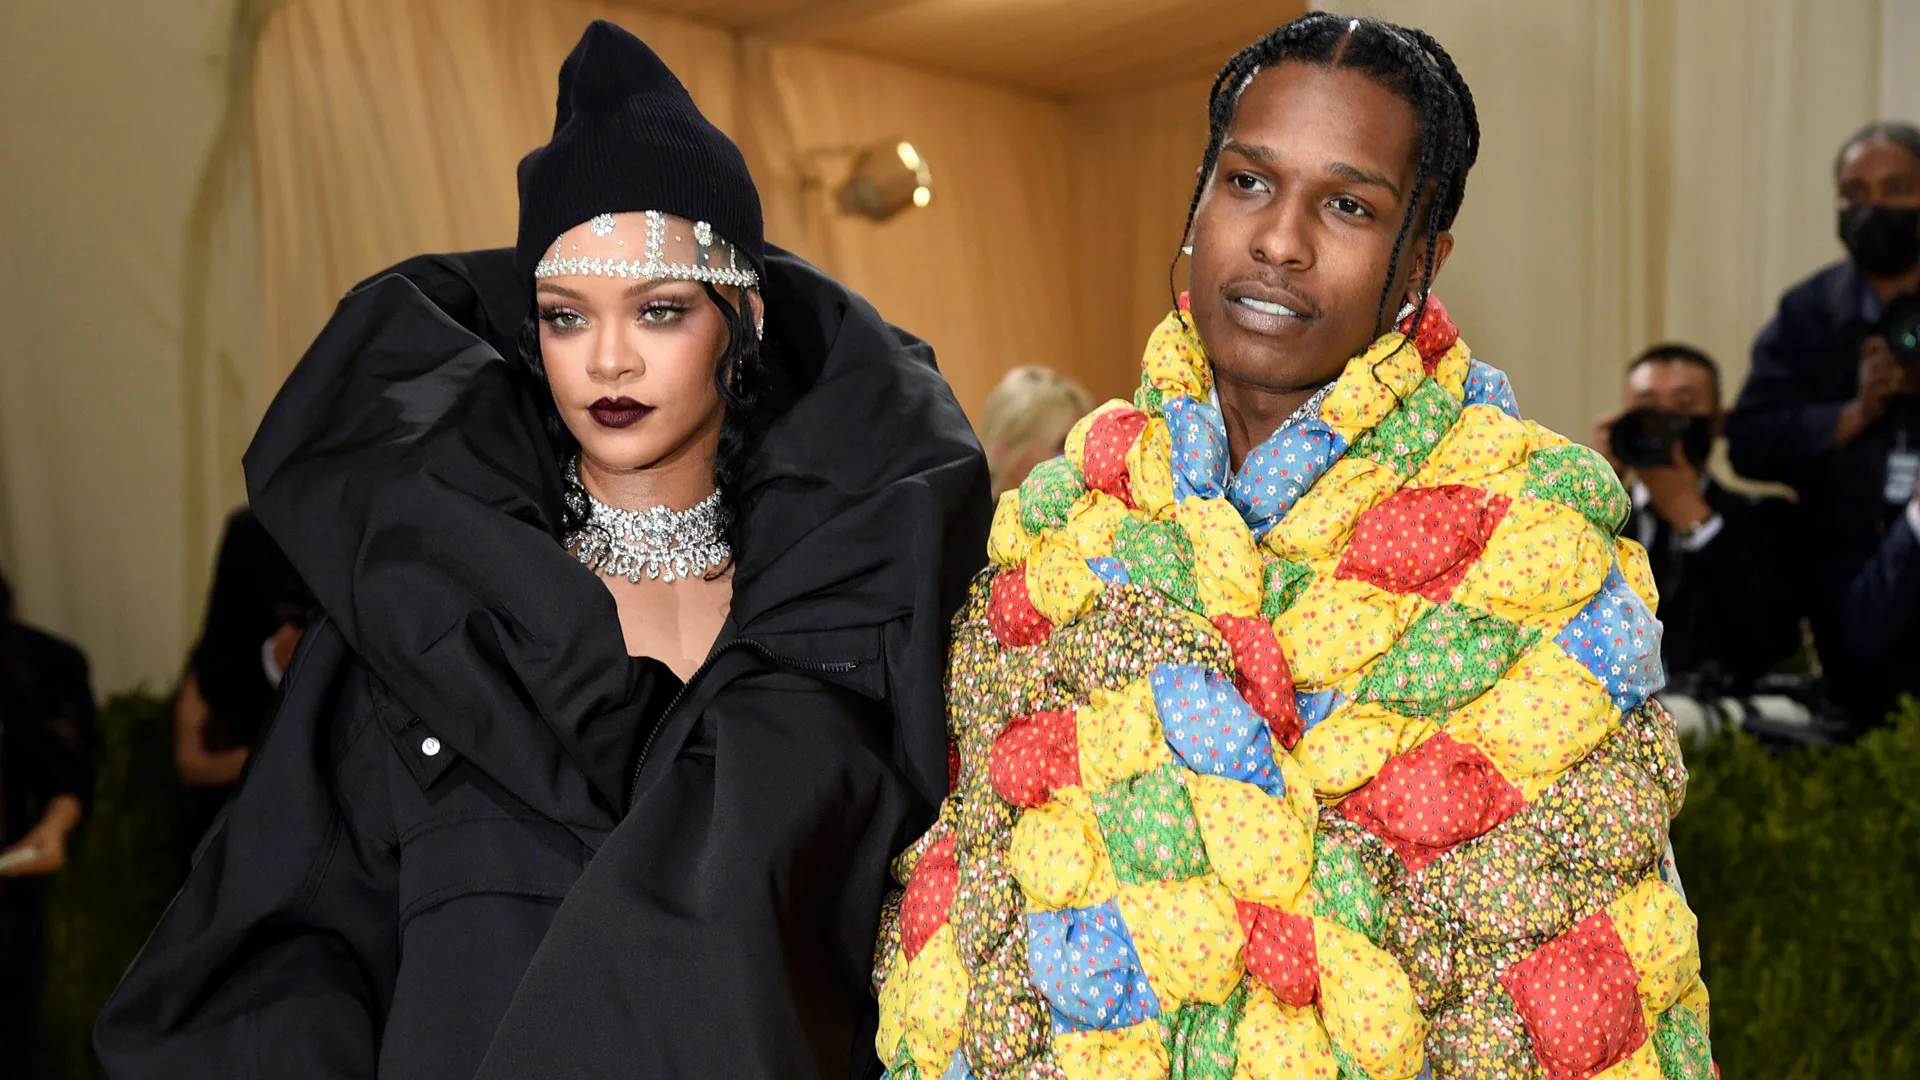 A photograph of Rhianna and ASAP Rocky at the Met Gala. Rhianna is wearing a black ruff neck outfit and hat with jewellery and ASAP Rocky is wearing a multi-coloured blanket style cape